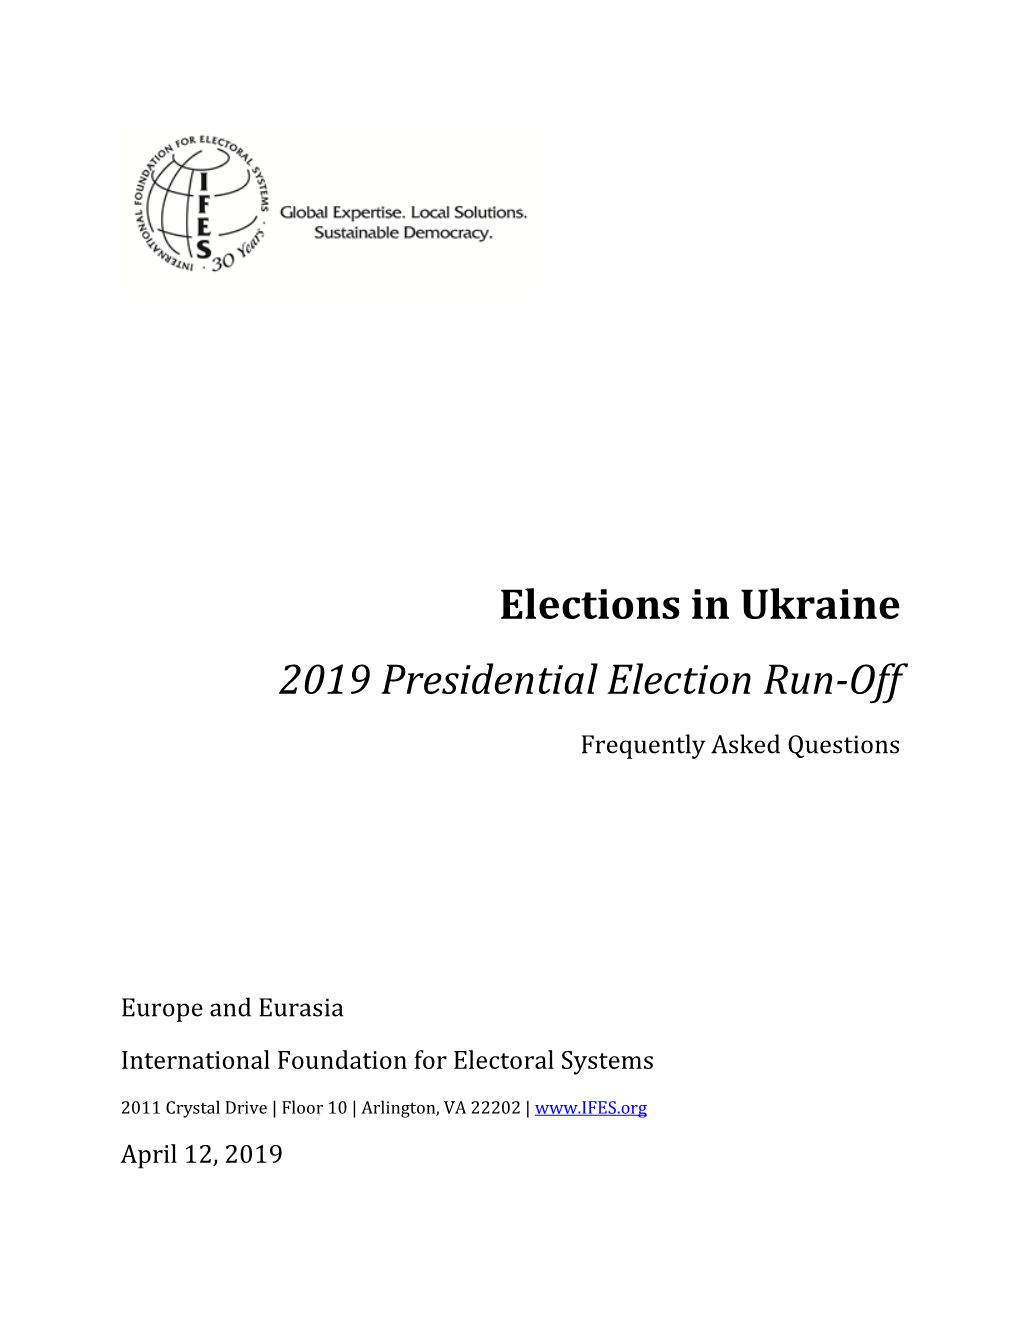 IFES Faqs on Elections in Ukraine